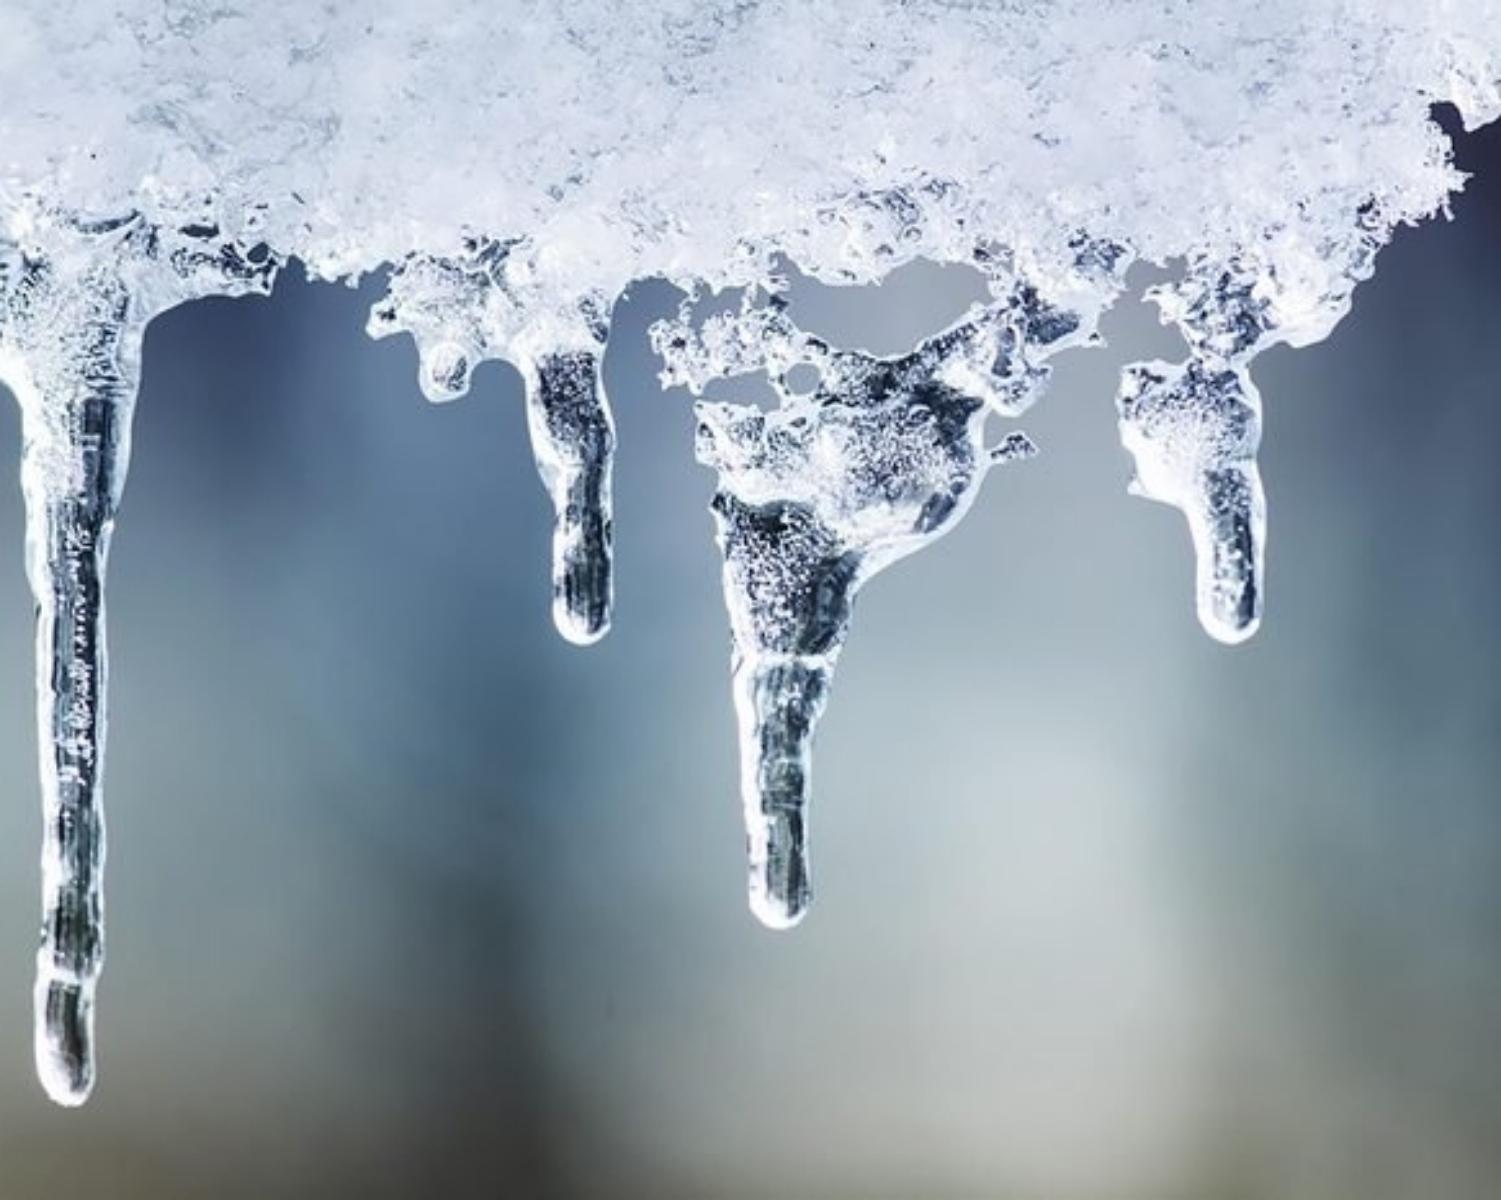 Hot Water Freezes Faster Than Cold Water